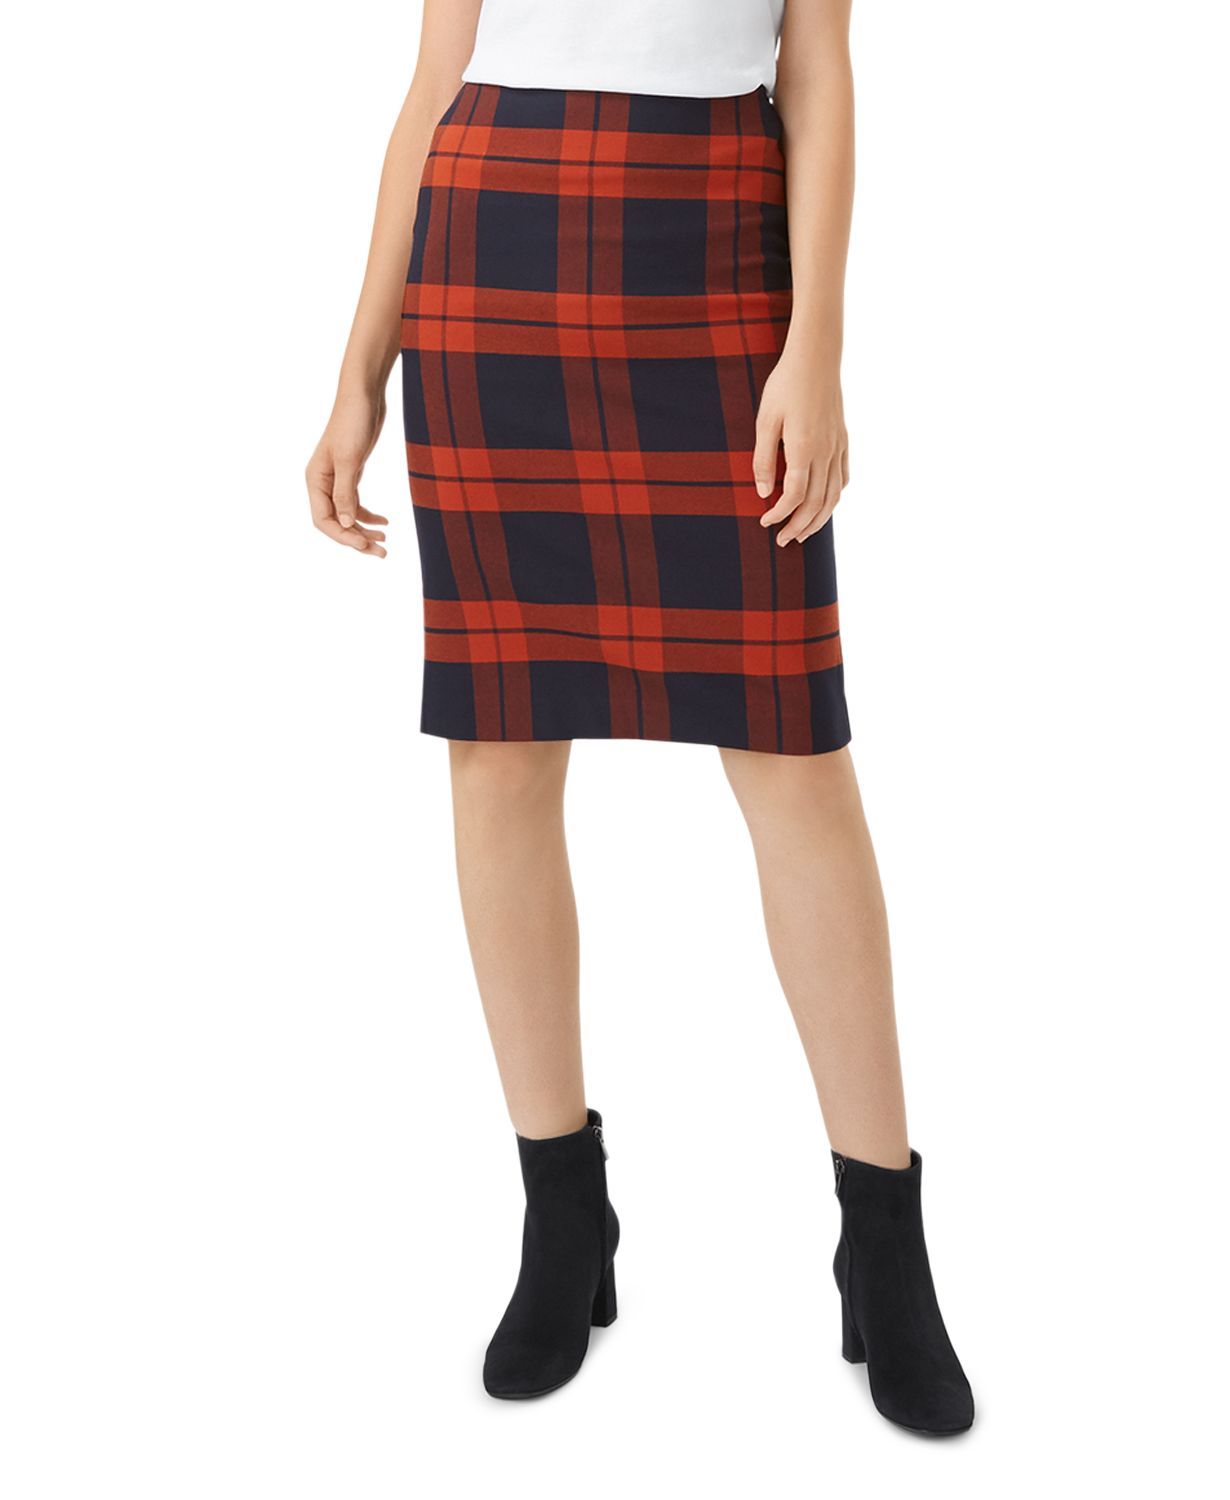 red plaid skirt outfits tumblr